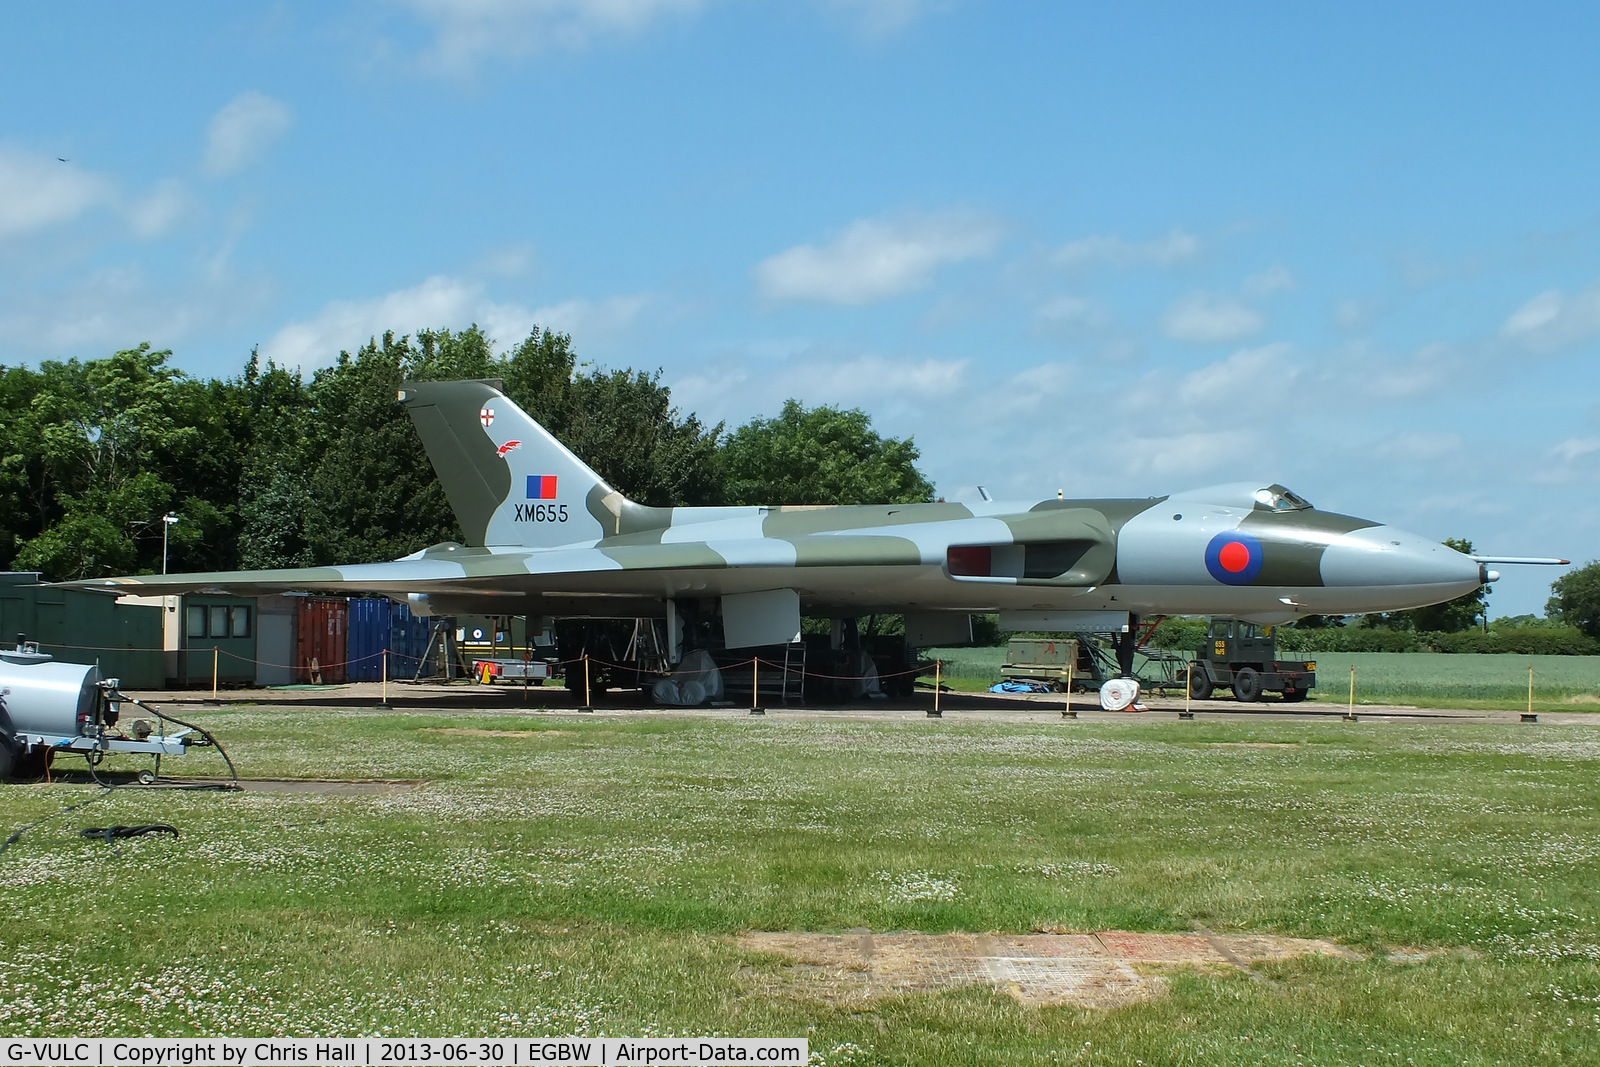 G-VULC, 1964 Avro Vulcan B.2A C/N Set 87, Owned by the XM655 Maintenance and Preservation Society, This Vulcan still performs high speed taxi runs